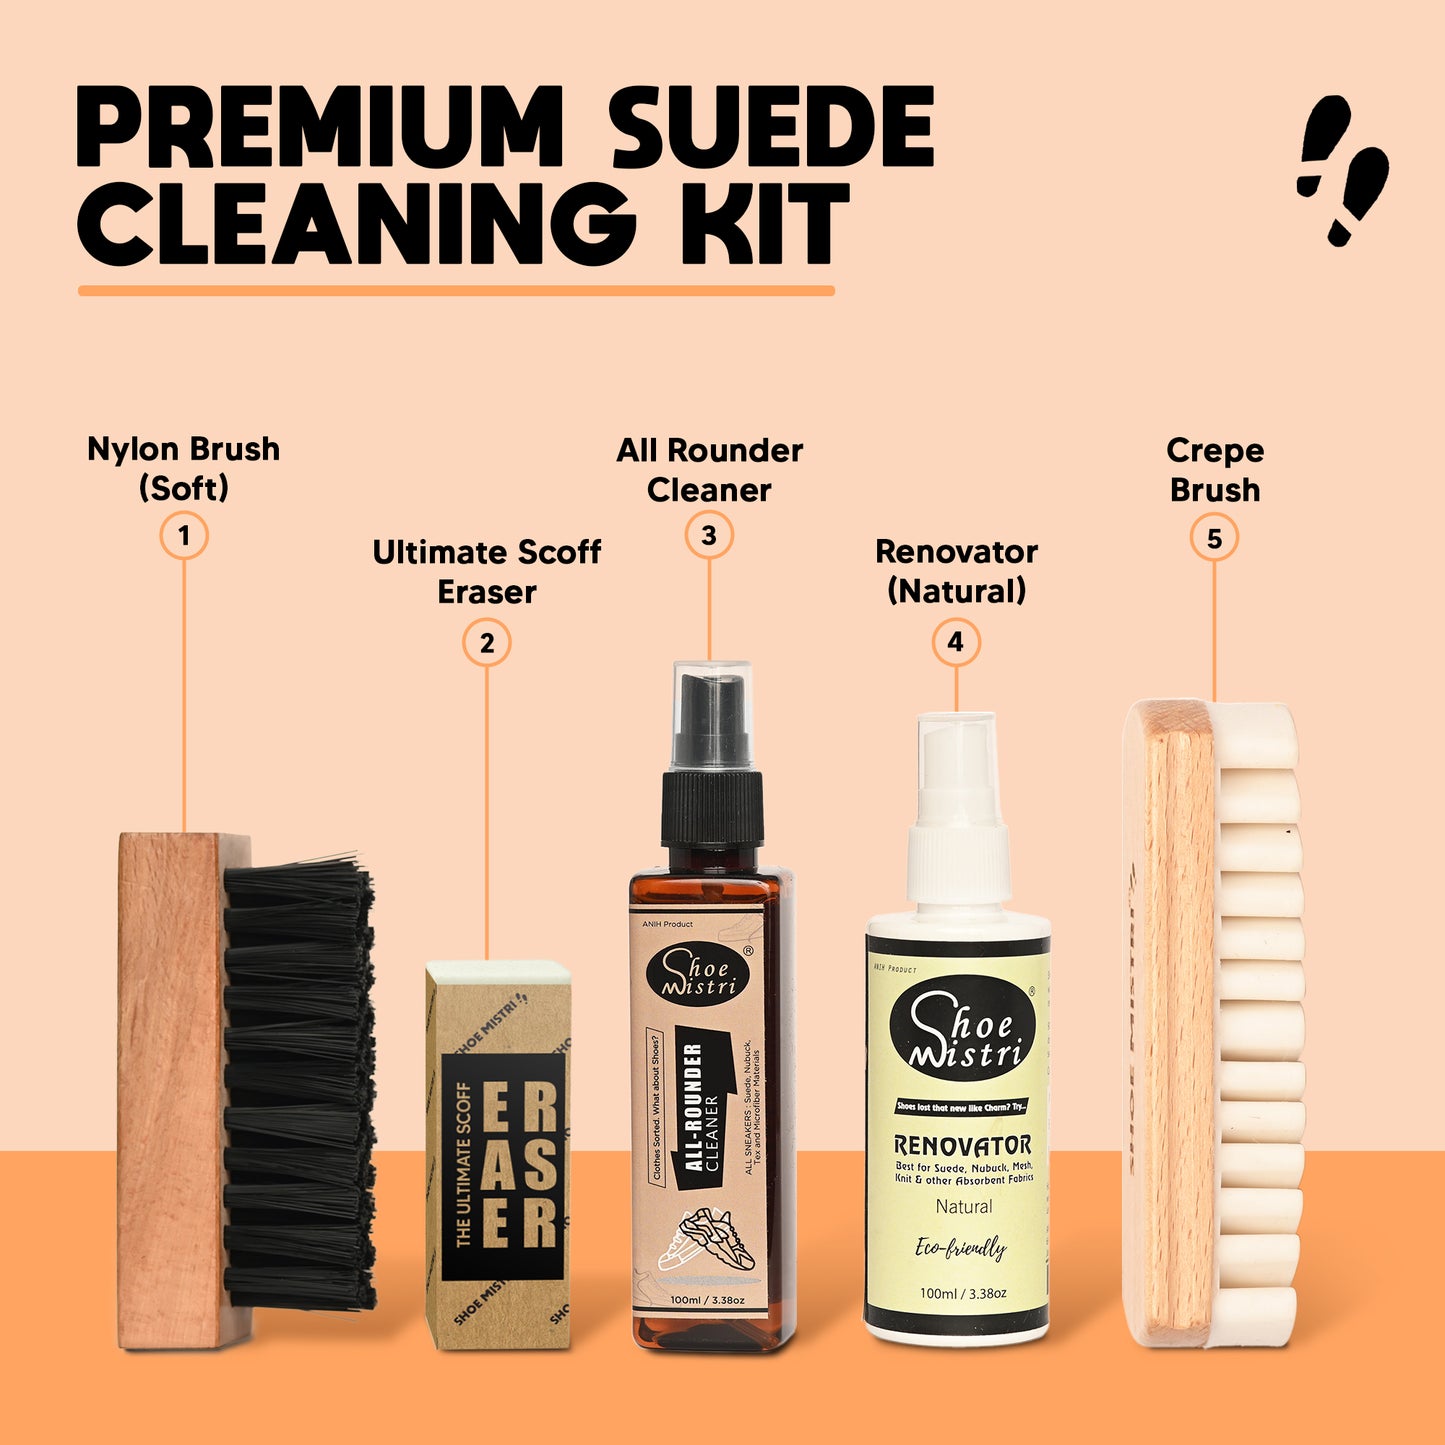 Shoe Mistri Premium Suede Cleaning Kit | Pack of Suede-Nubuck Cleaner & Renovator, Soft Brush, Crepe Rubber Suede Brush, and with Suede Eraser | Suitable for Cleaning Suede & Nubuck Shoes